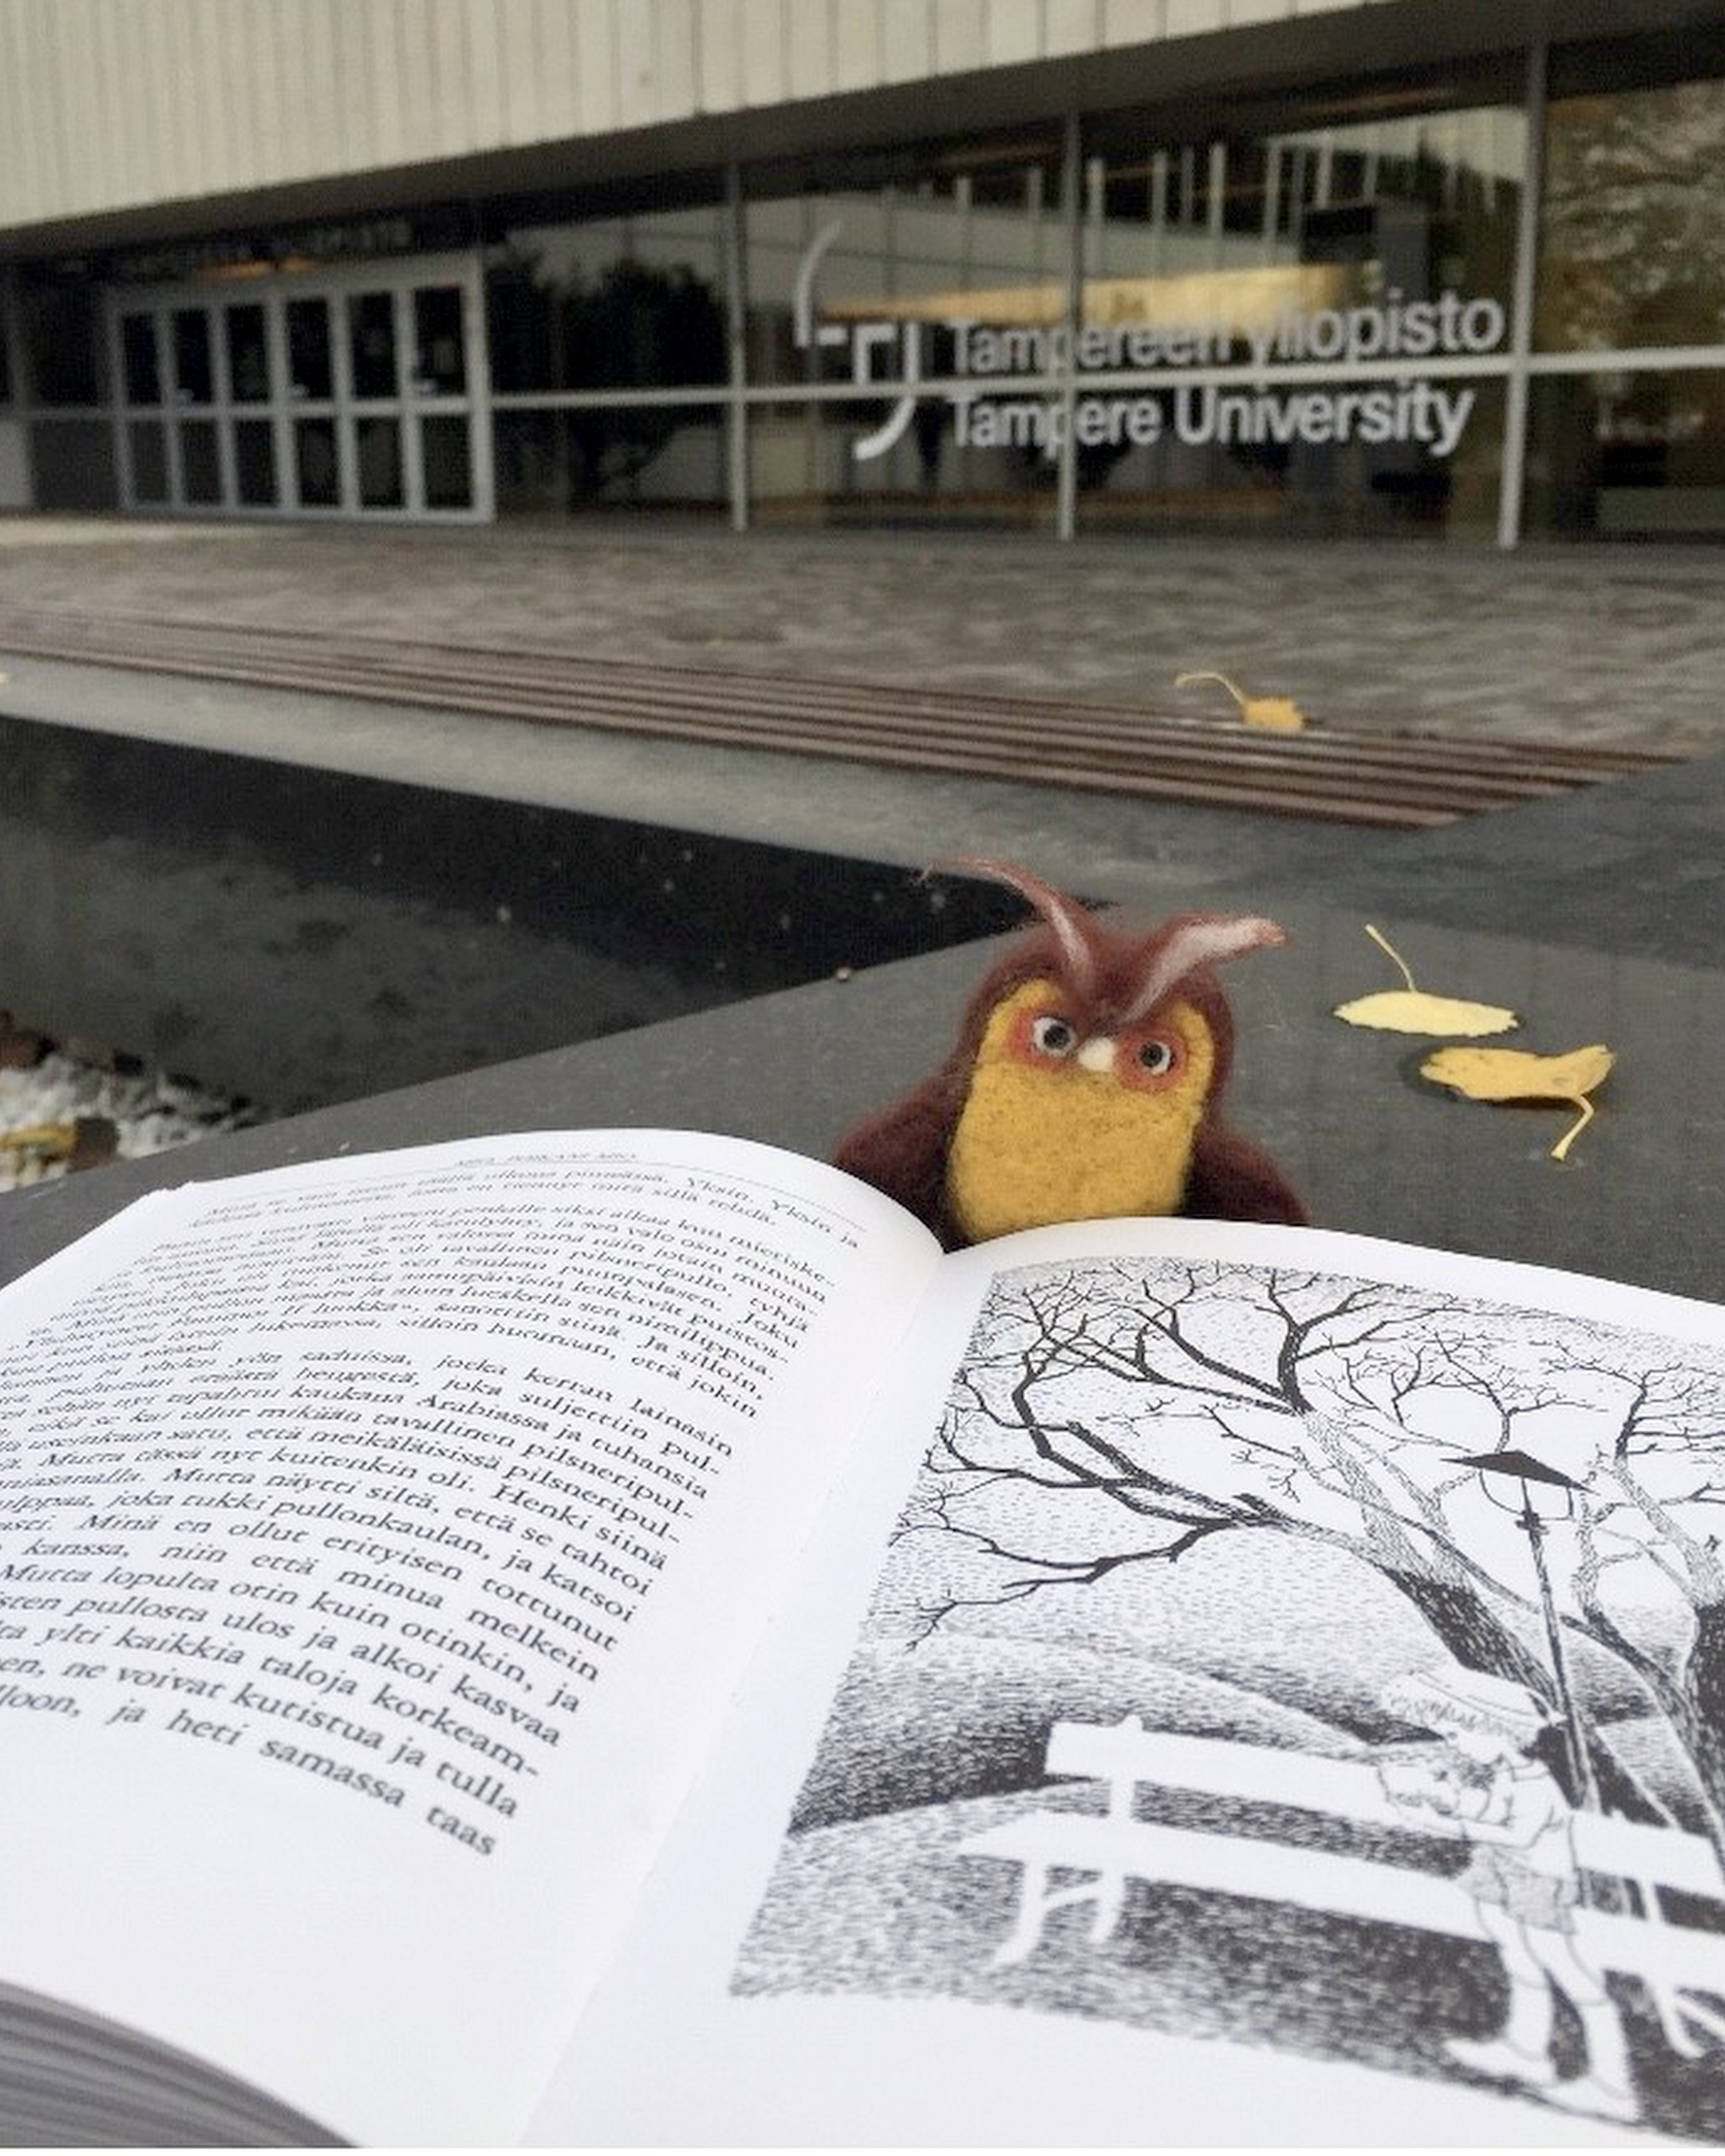 A toy owl reading an open book in front of the university.